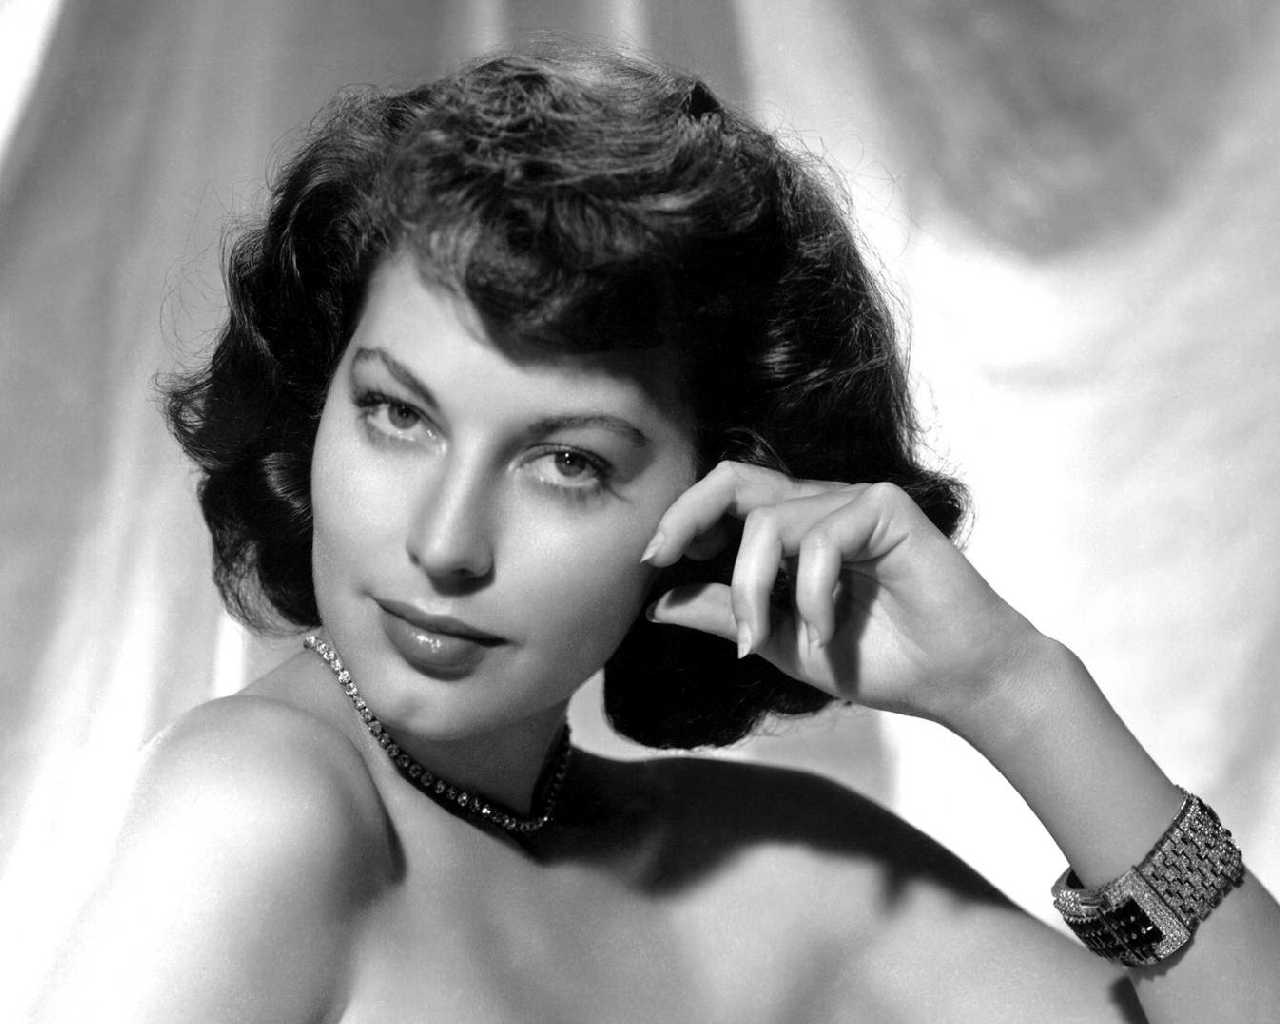 Can You Name These Retro Hairstyles? Ava Gardner